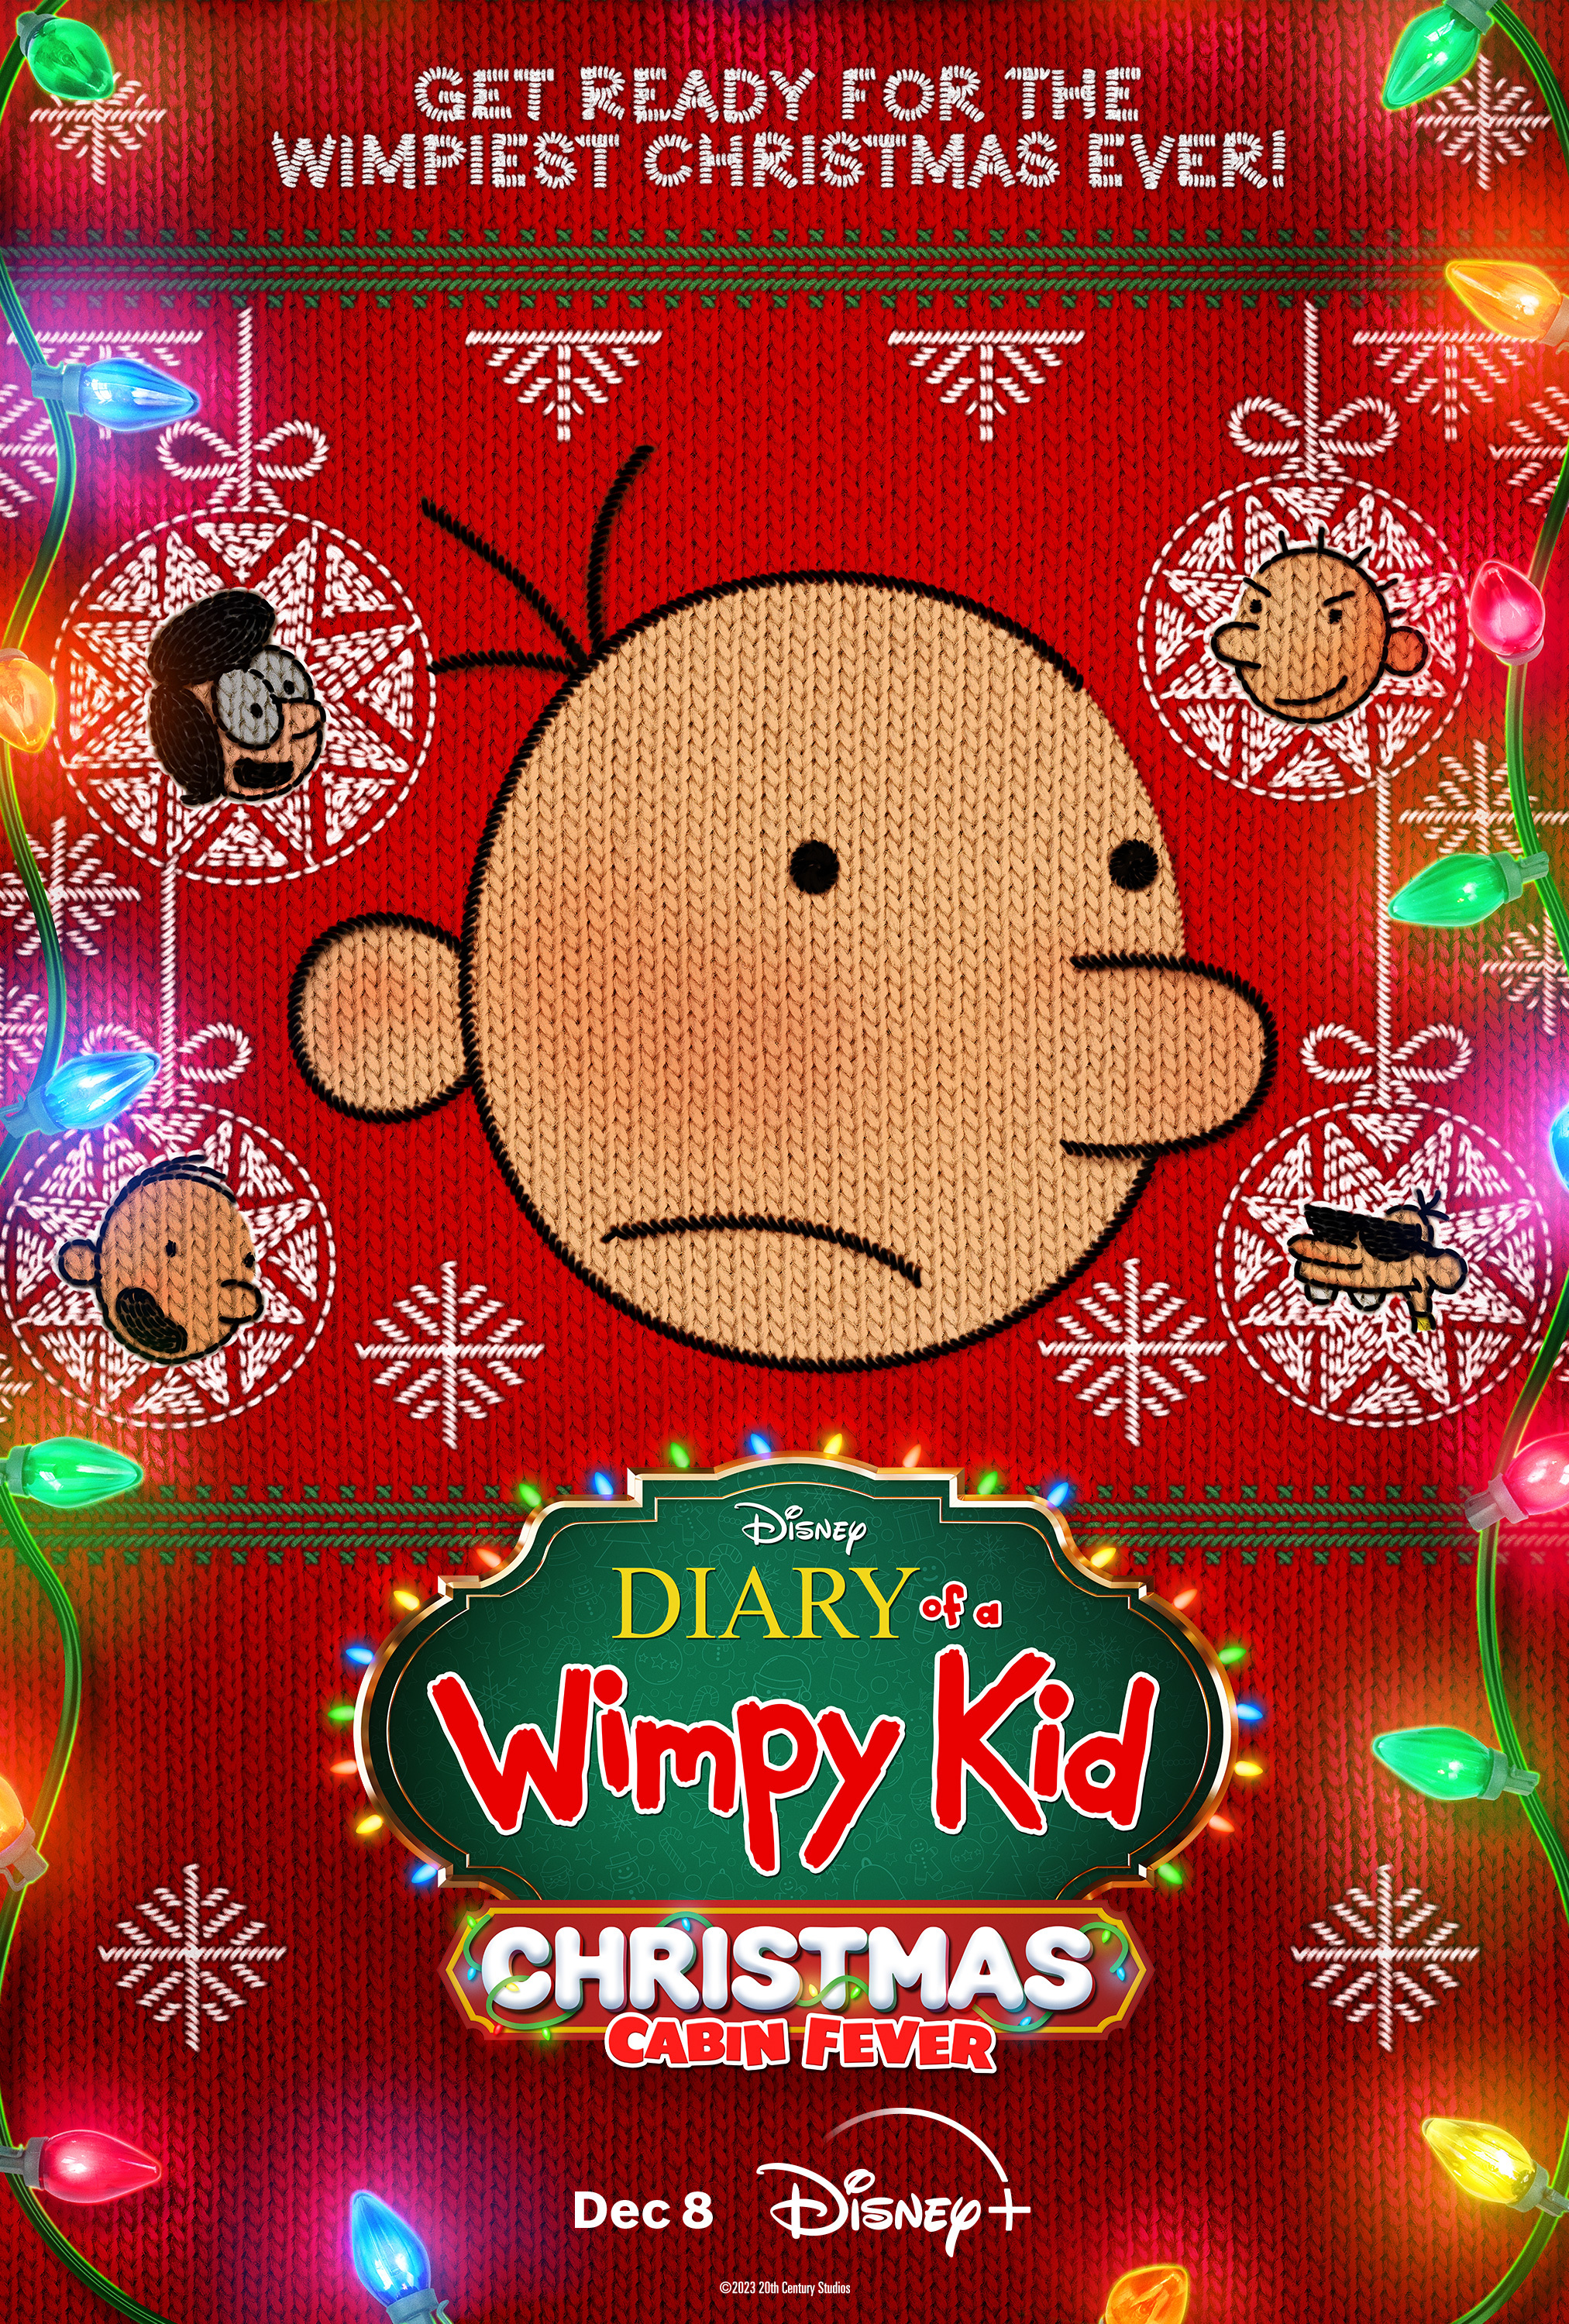 Wimpy Kid Christmas Cabin Fever Phone Wallpaper